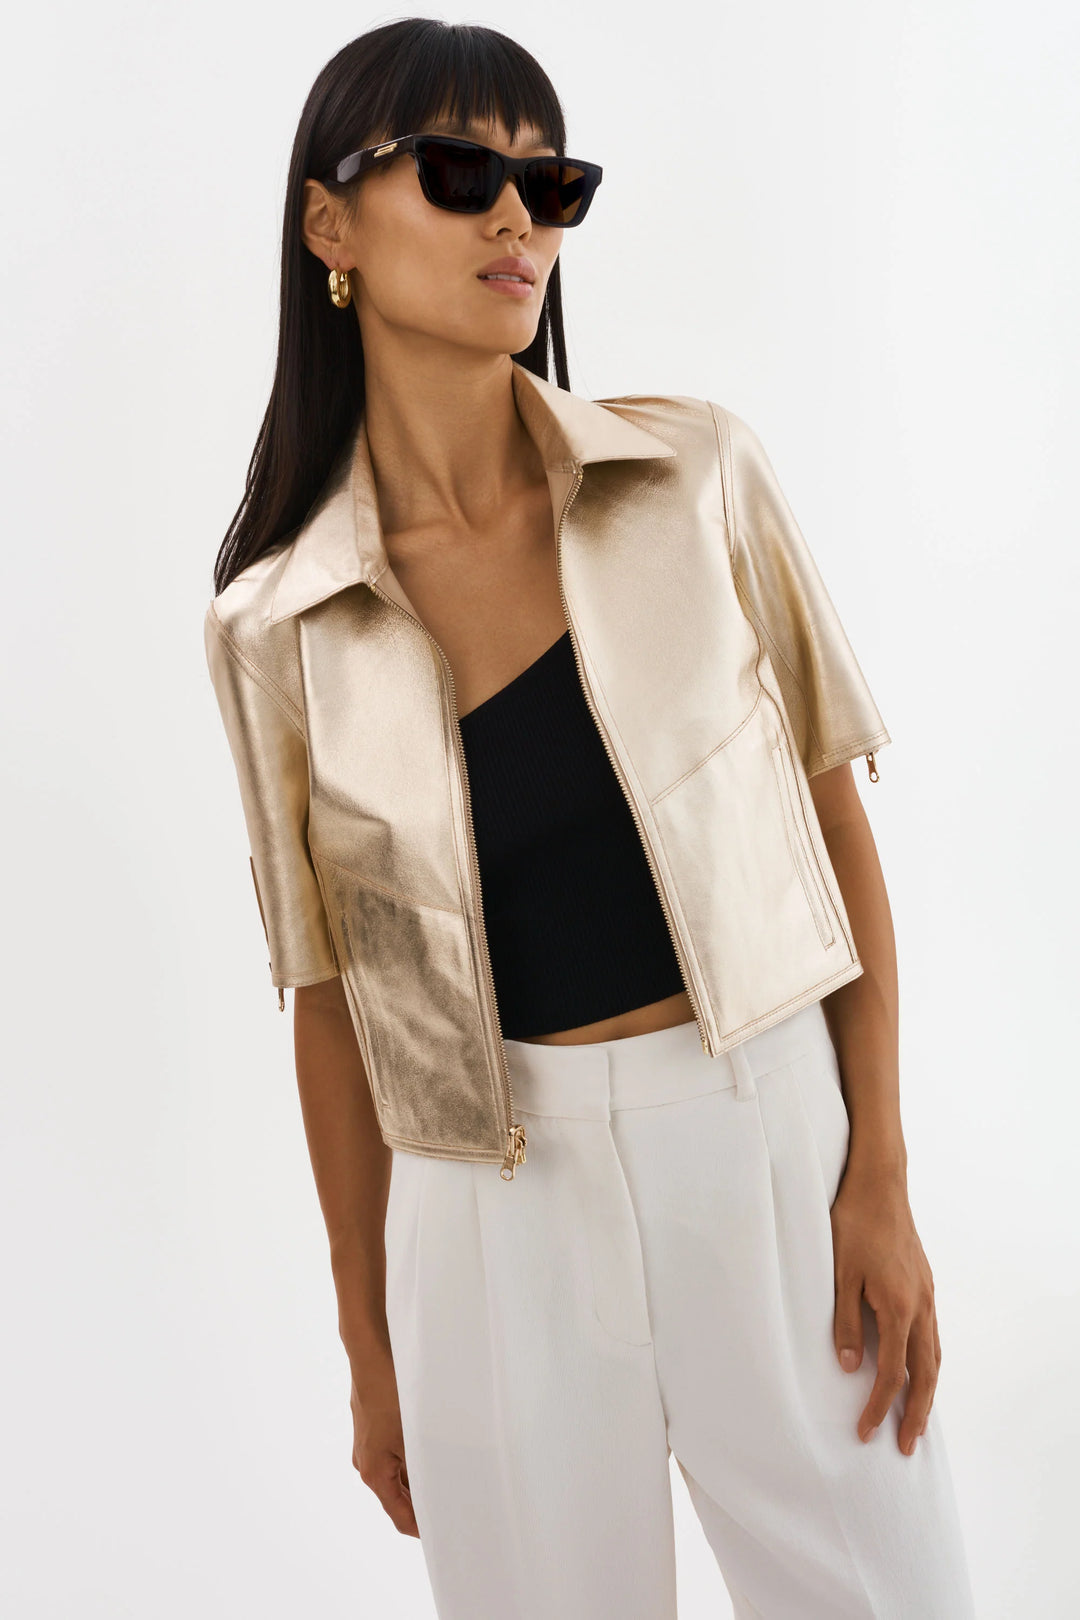 SEVANA REVERSIBLE LEATHER JACKET (WHEAT/GOLD) - LAMARQUE